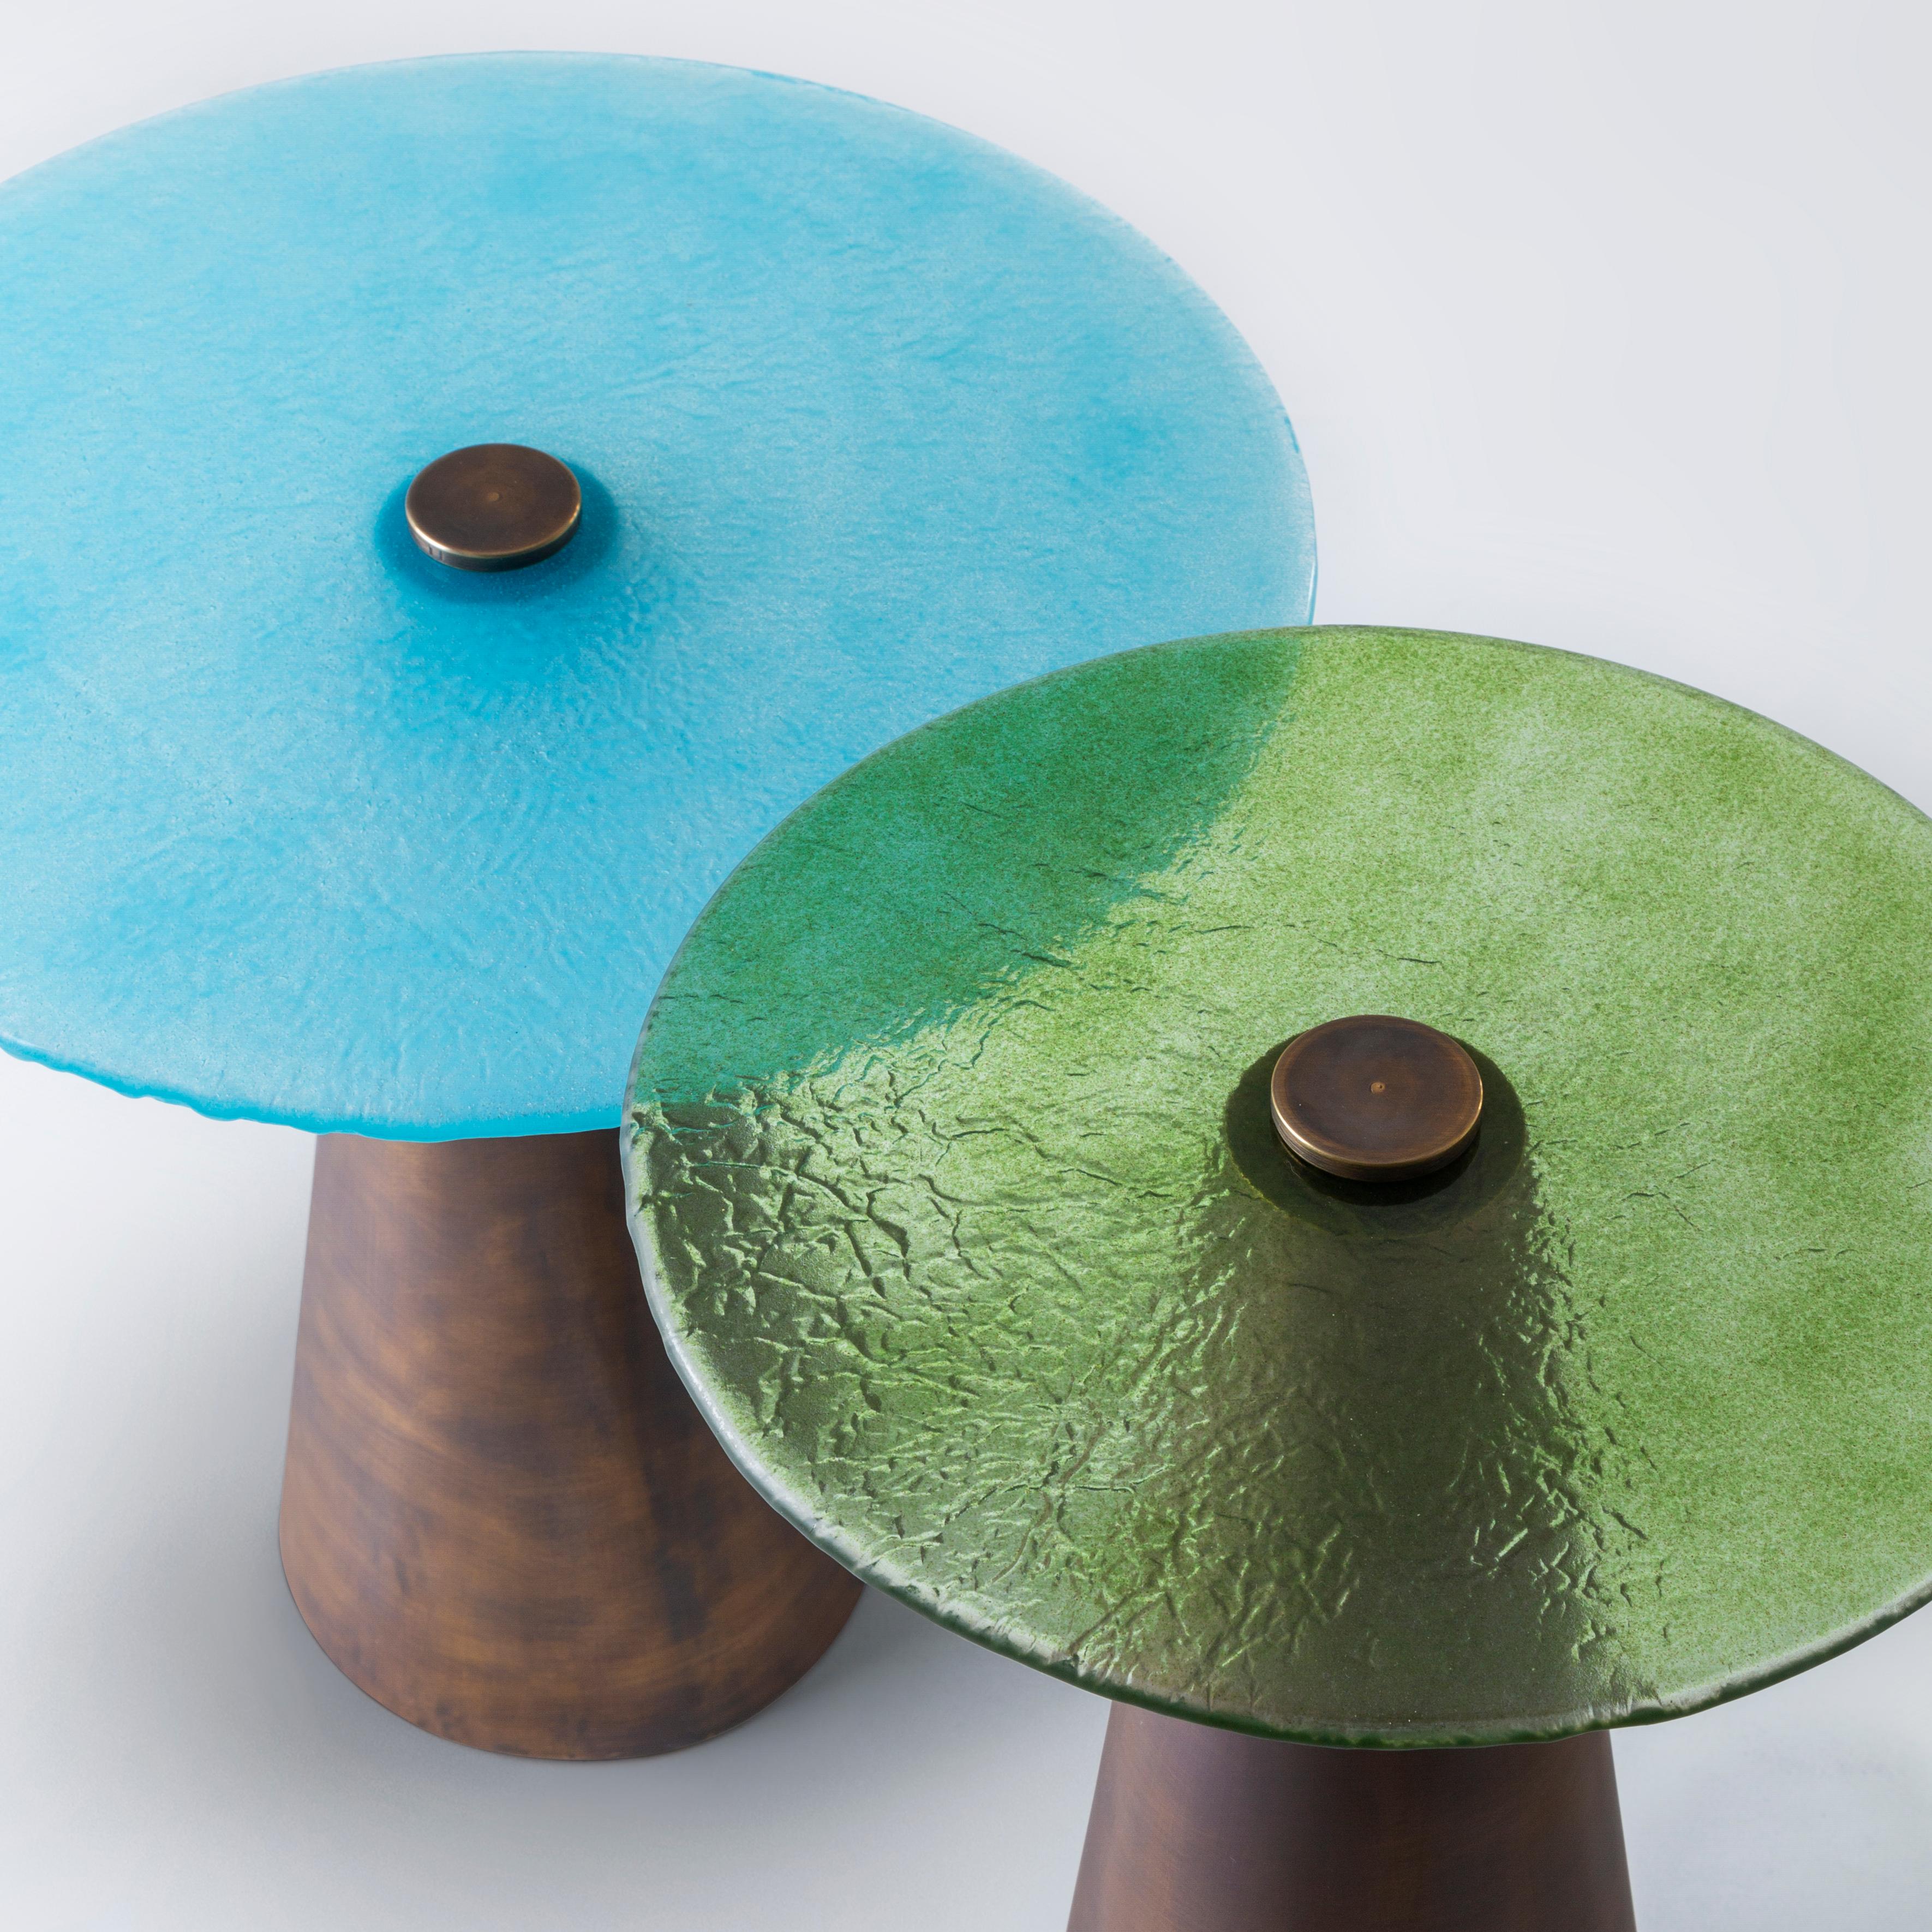 Blue & Green Set of Accent Tables with Hand-Blown Glass Mounted on Brass Cones. 
Fun, elegant and versatile. This duo made of brass base and hand-blown craft glass are a joy to look at. The turquoise – apple green mix is an all time classic, but